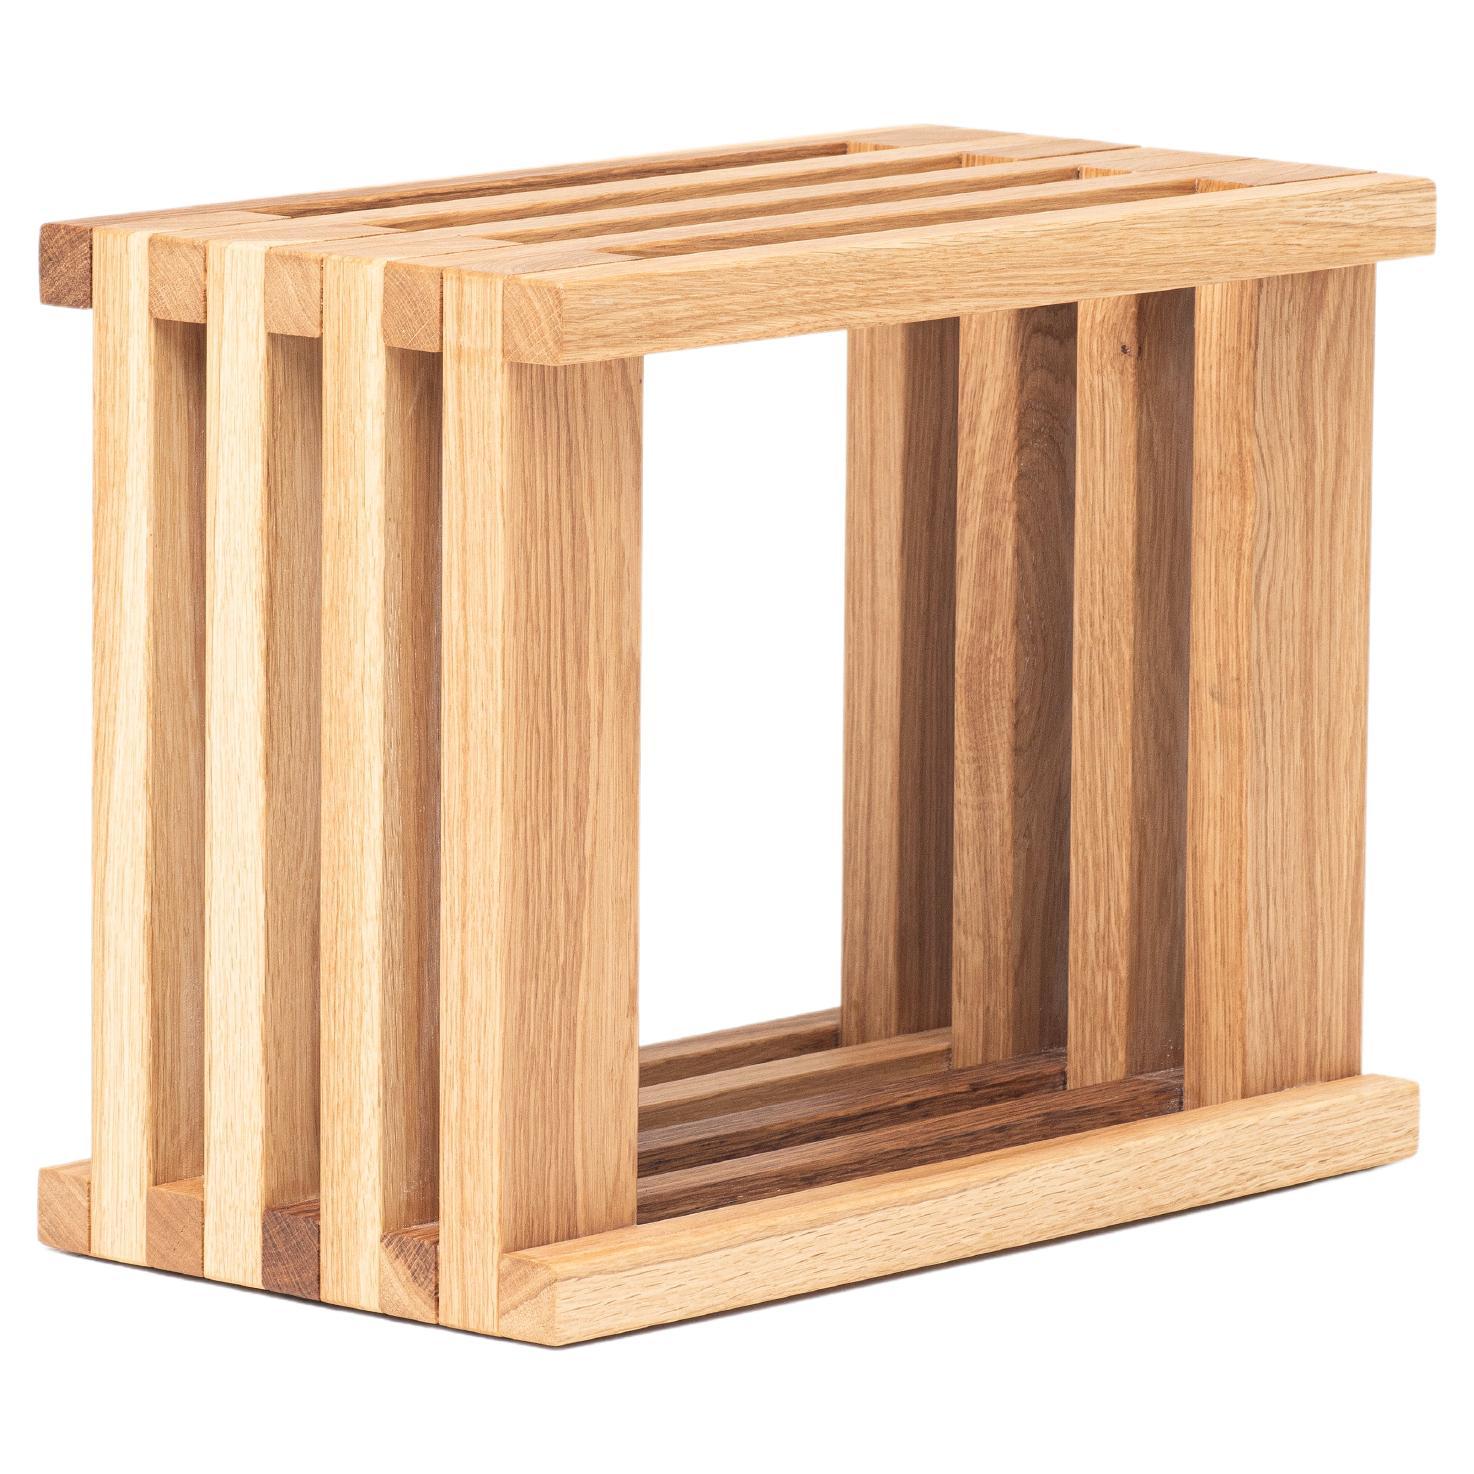 Low Stool “Oslinchik 06” Natural Oak Collection